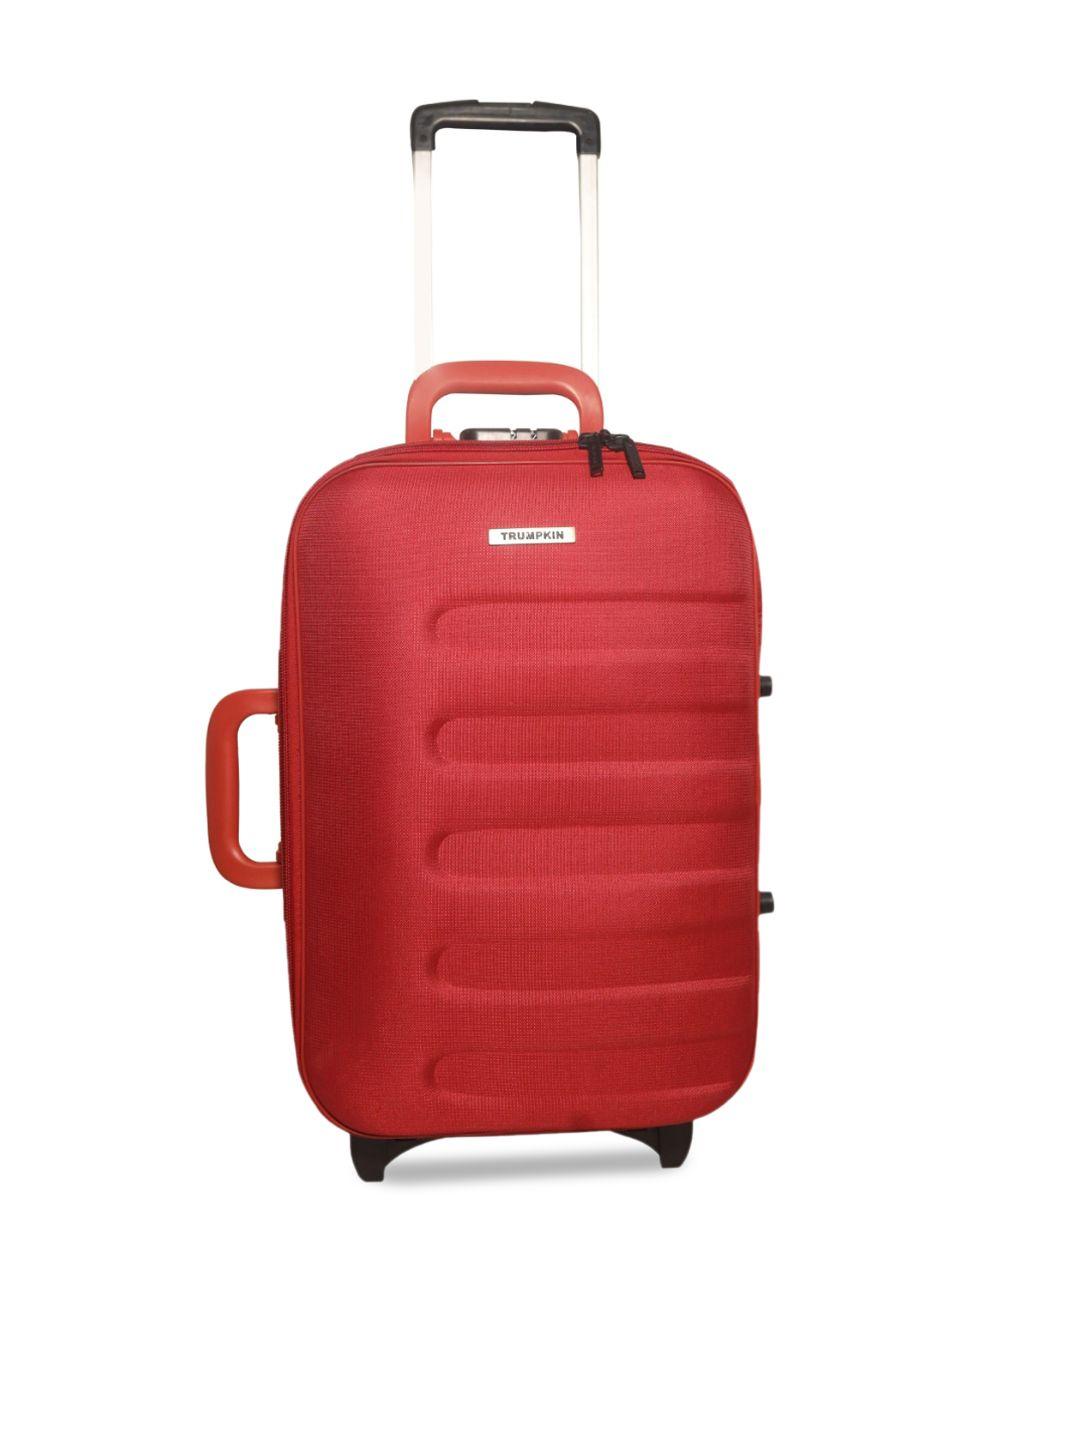 trumpkin  red small hard luggage polyester trolley bag